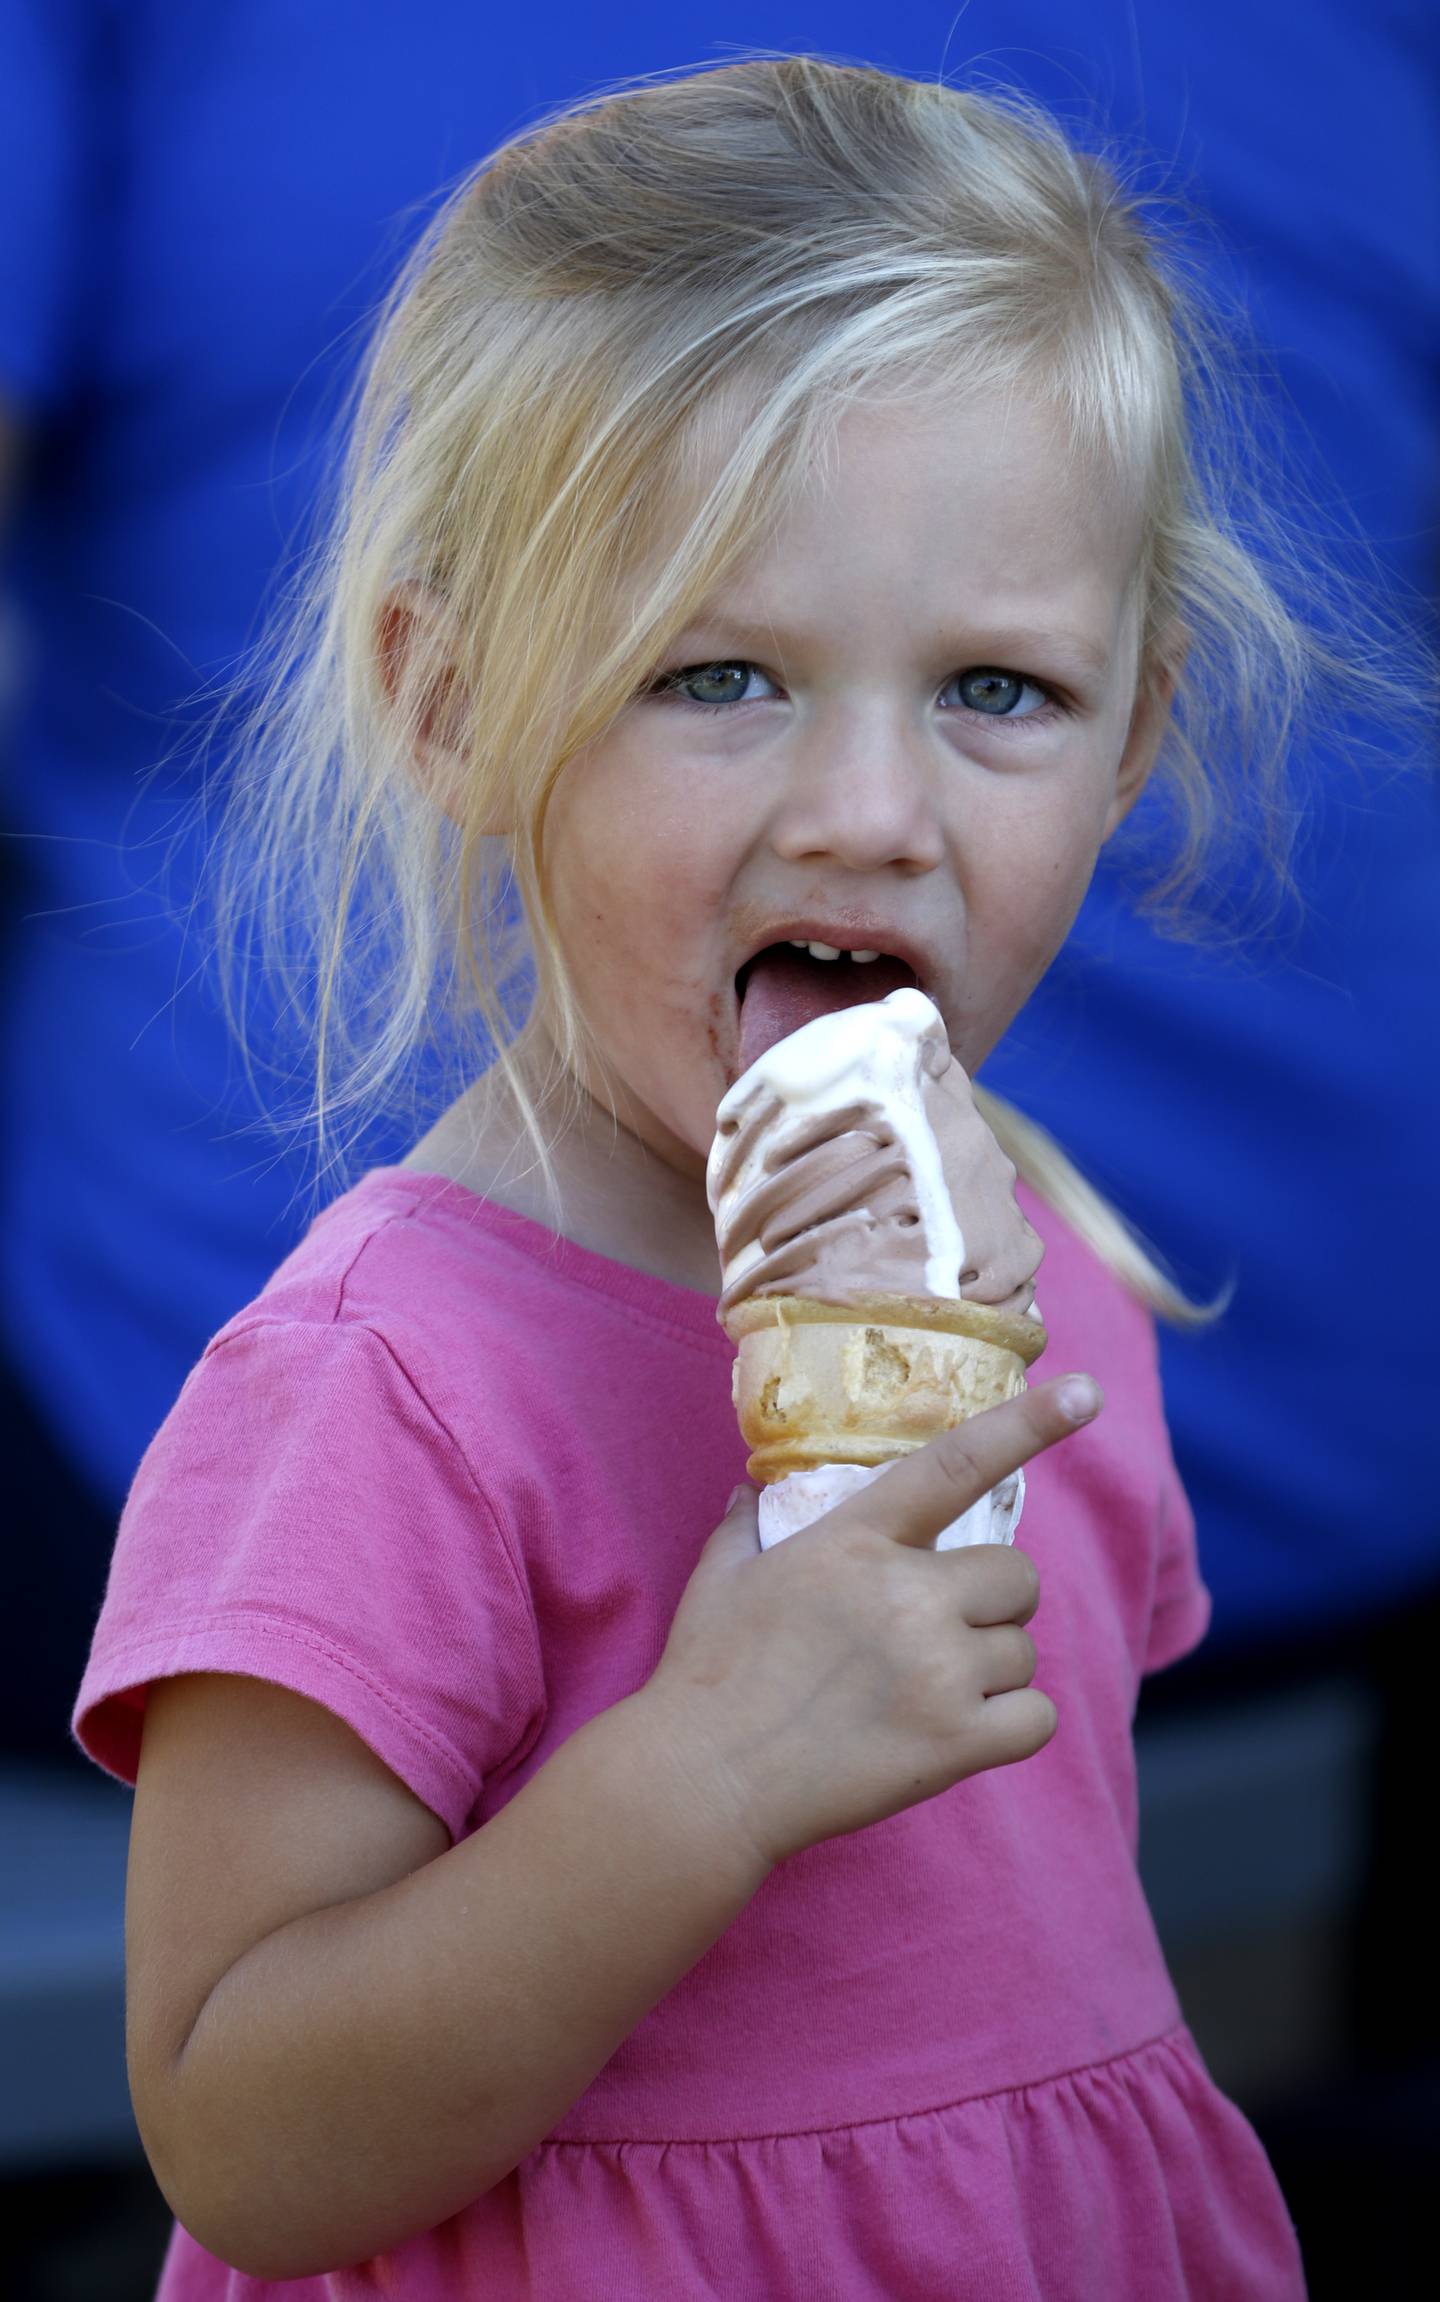 Freya Schwartz, 2, enjoys an ice cream cone outside the Dari in Hebron on Sunday, Sept. 18, 2022. The Hebron landmark, that has been in operation for 53 years, is closing and up for sale. Sunday was their last day of operation.